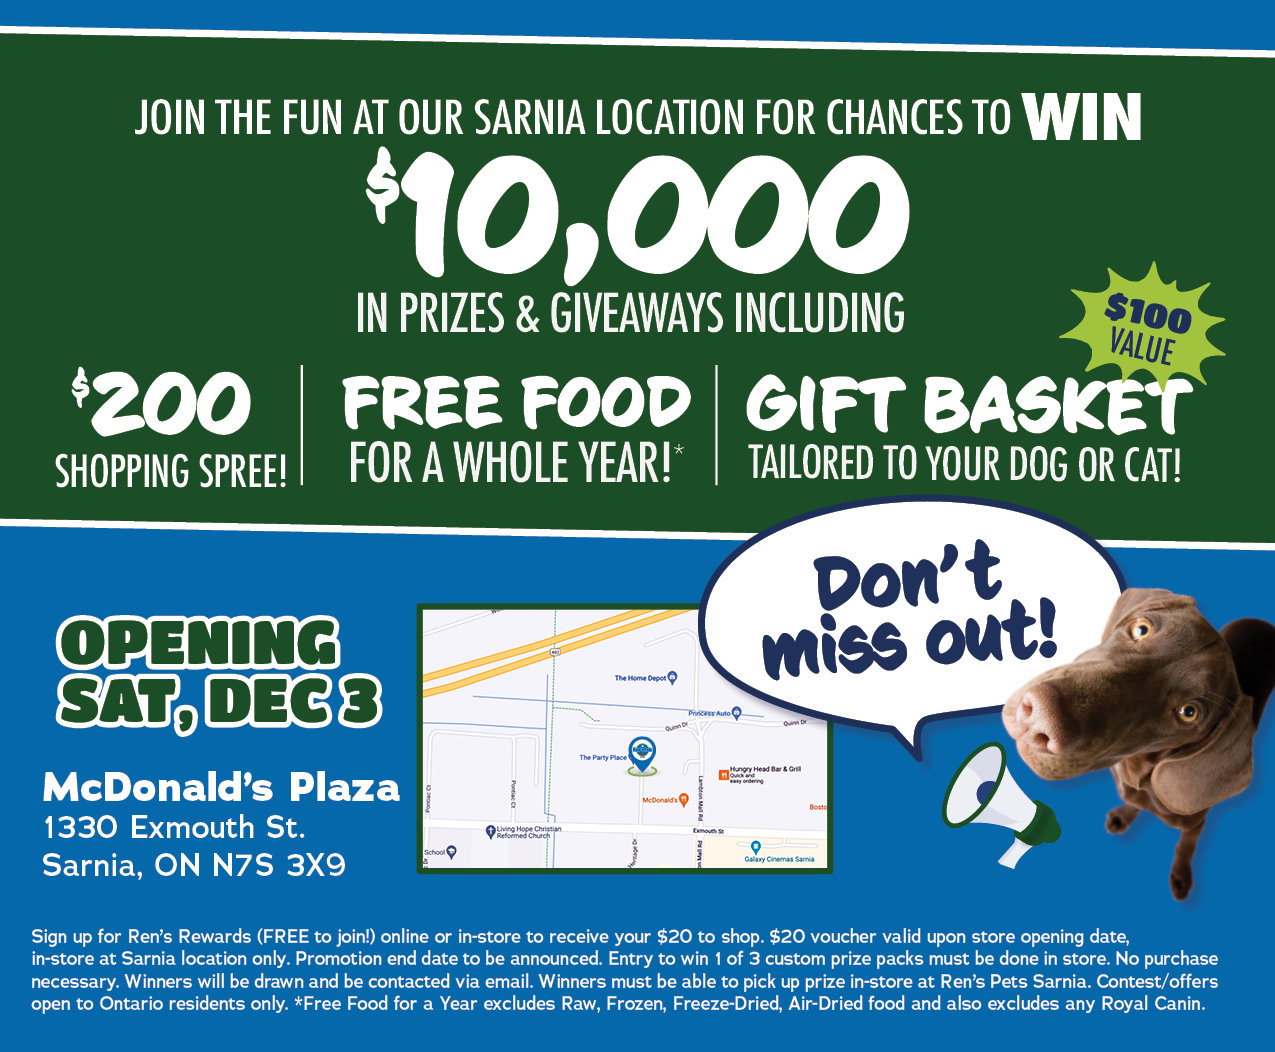 Join the fun at out Sarnia location for chances to win prizes & giveaways